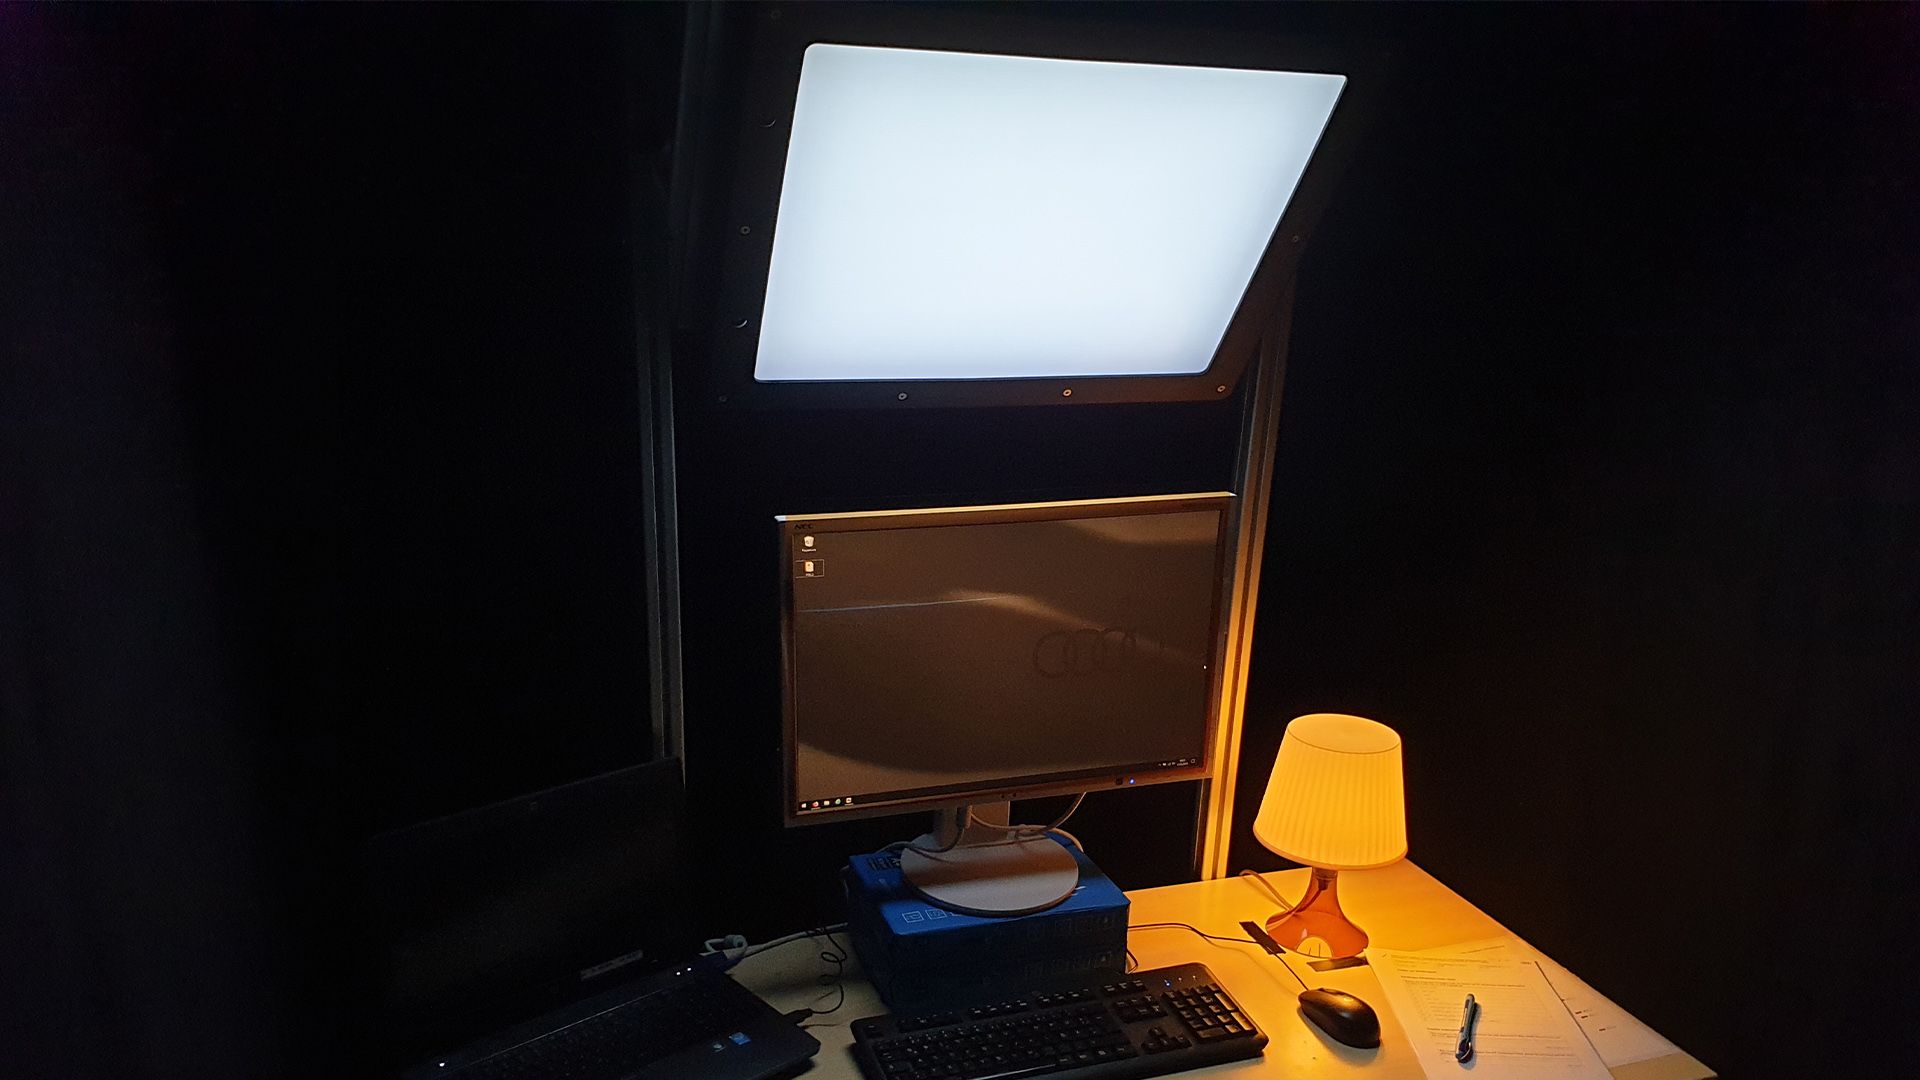 Laboratory experiment: This is what the setup inside the darkened box looked like. 